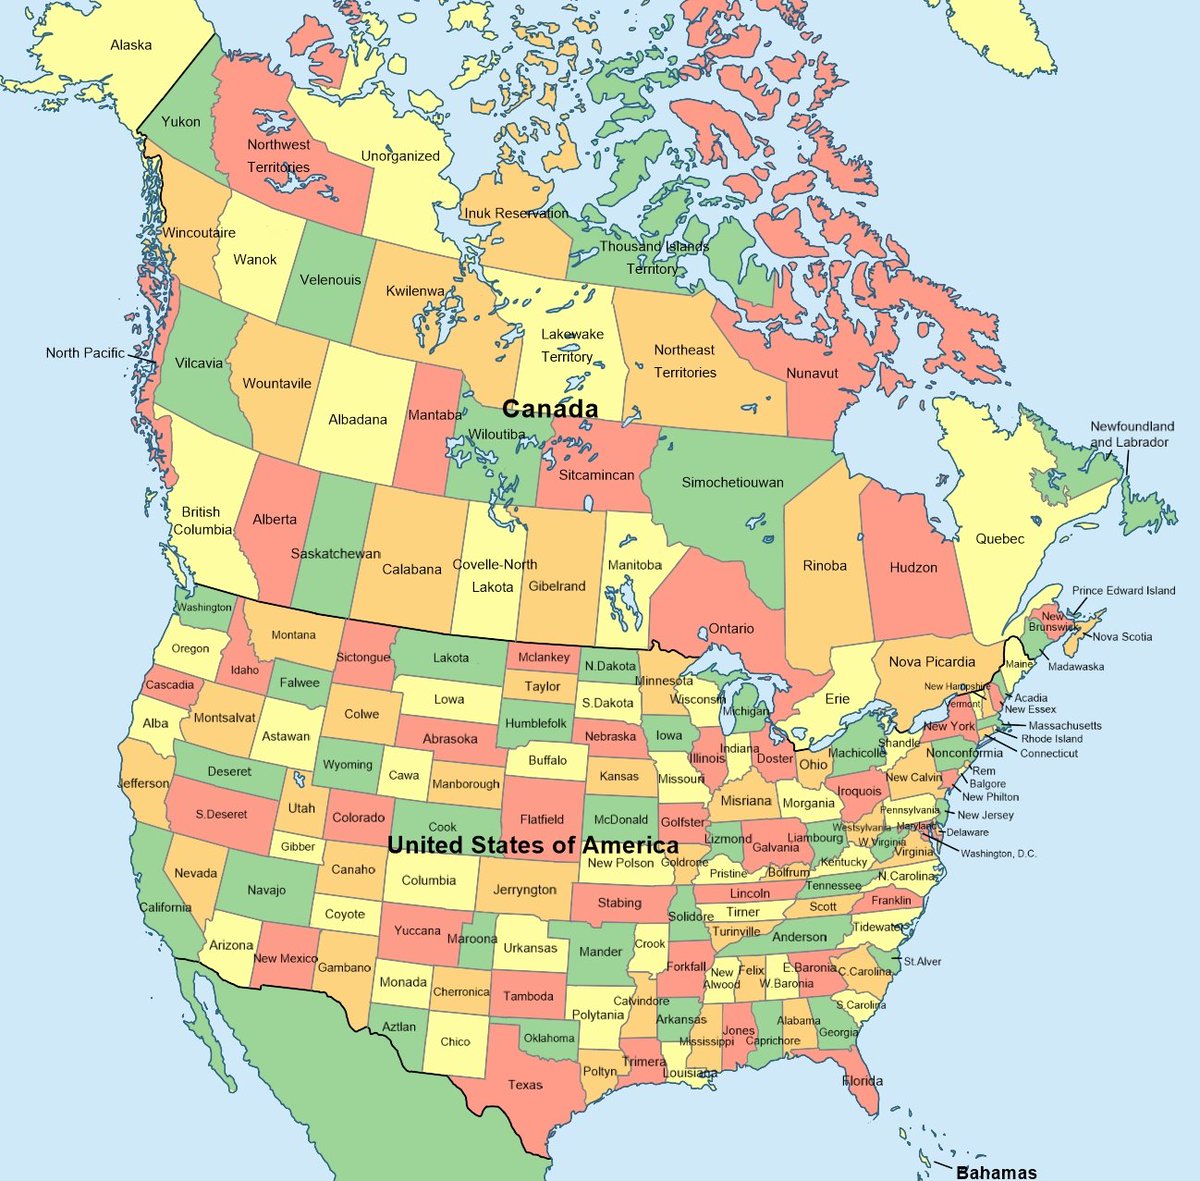 Euros give Americans shit for not knowing geography, but how many of these states do you recognize?